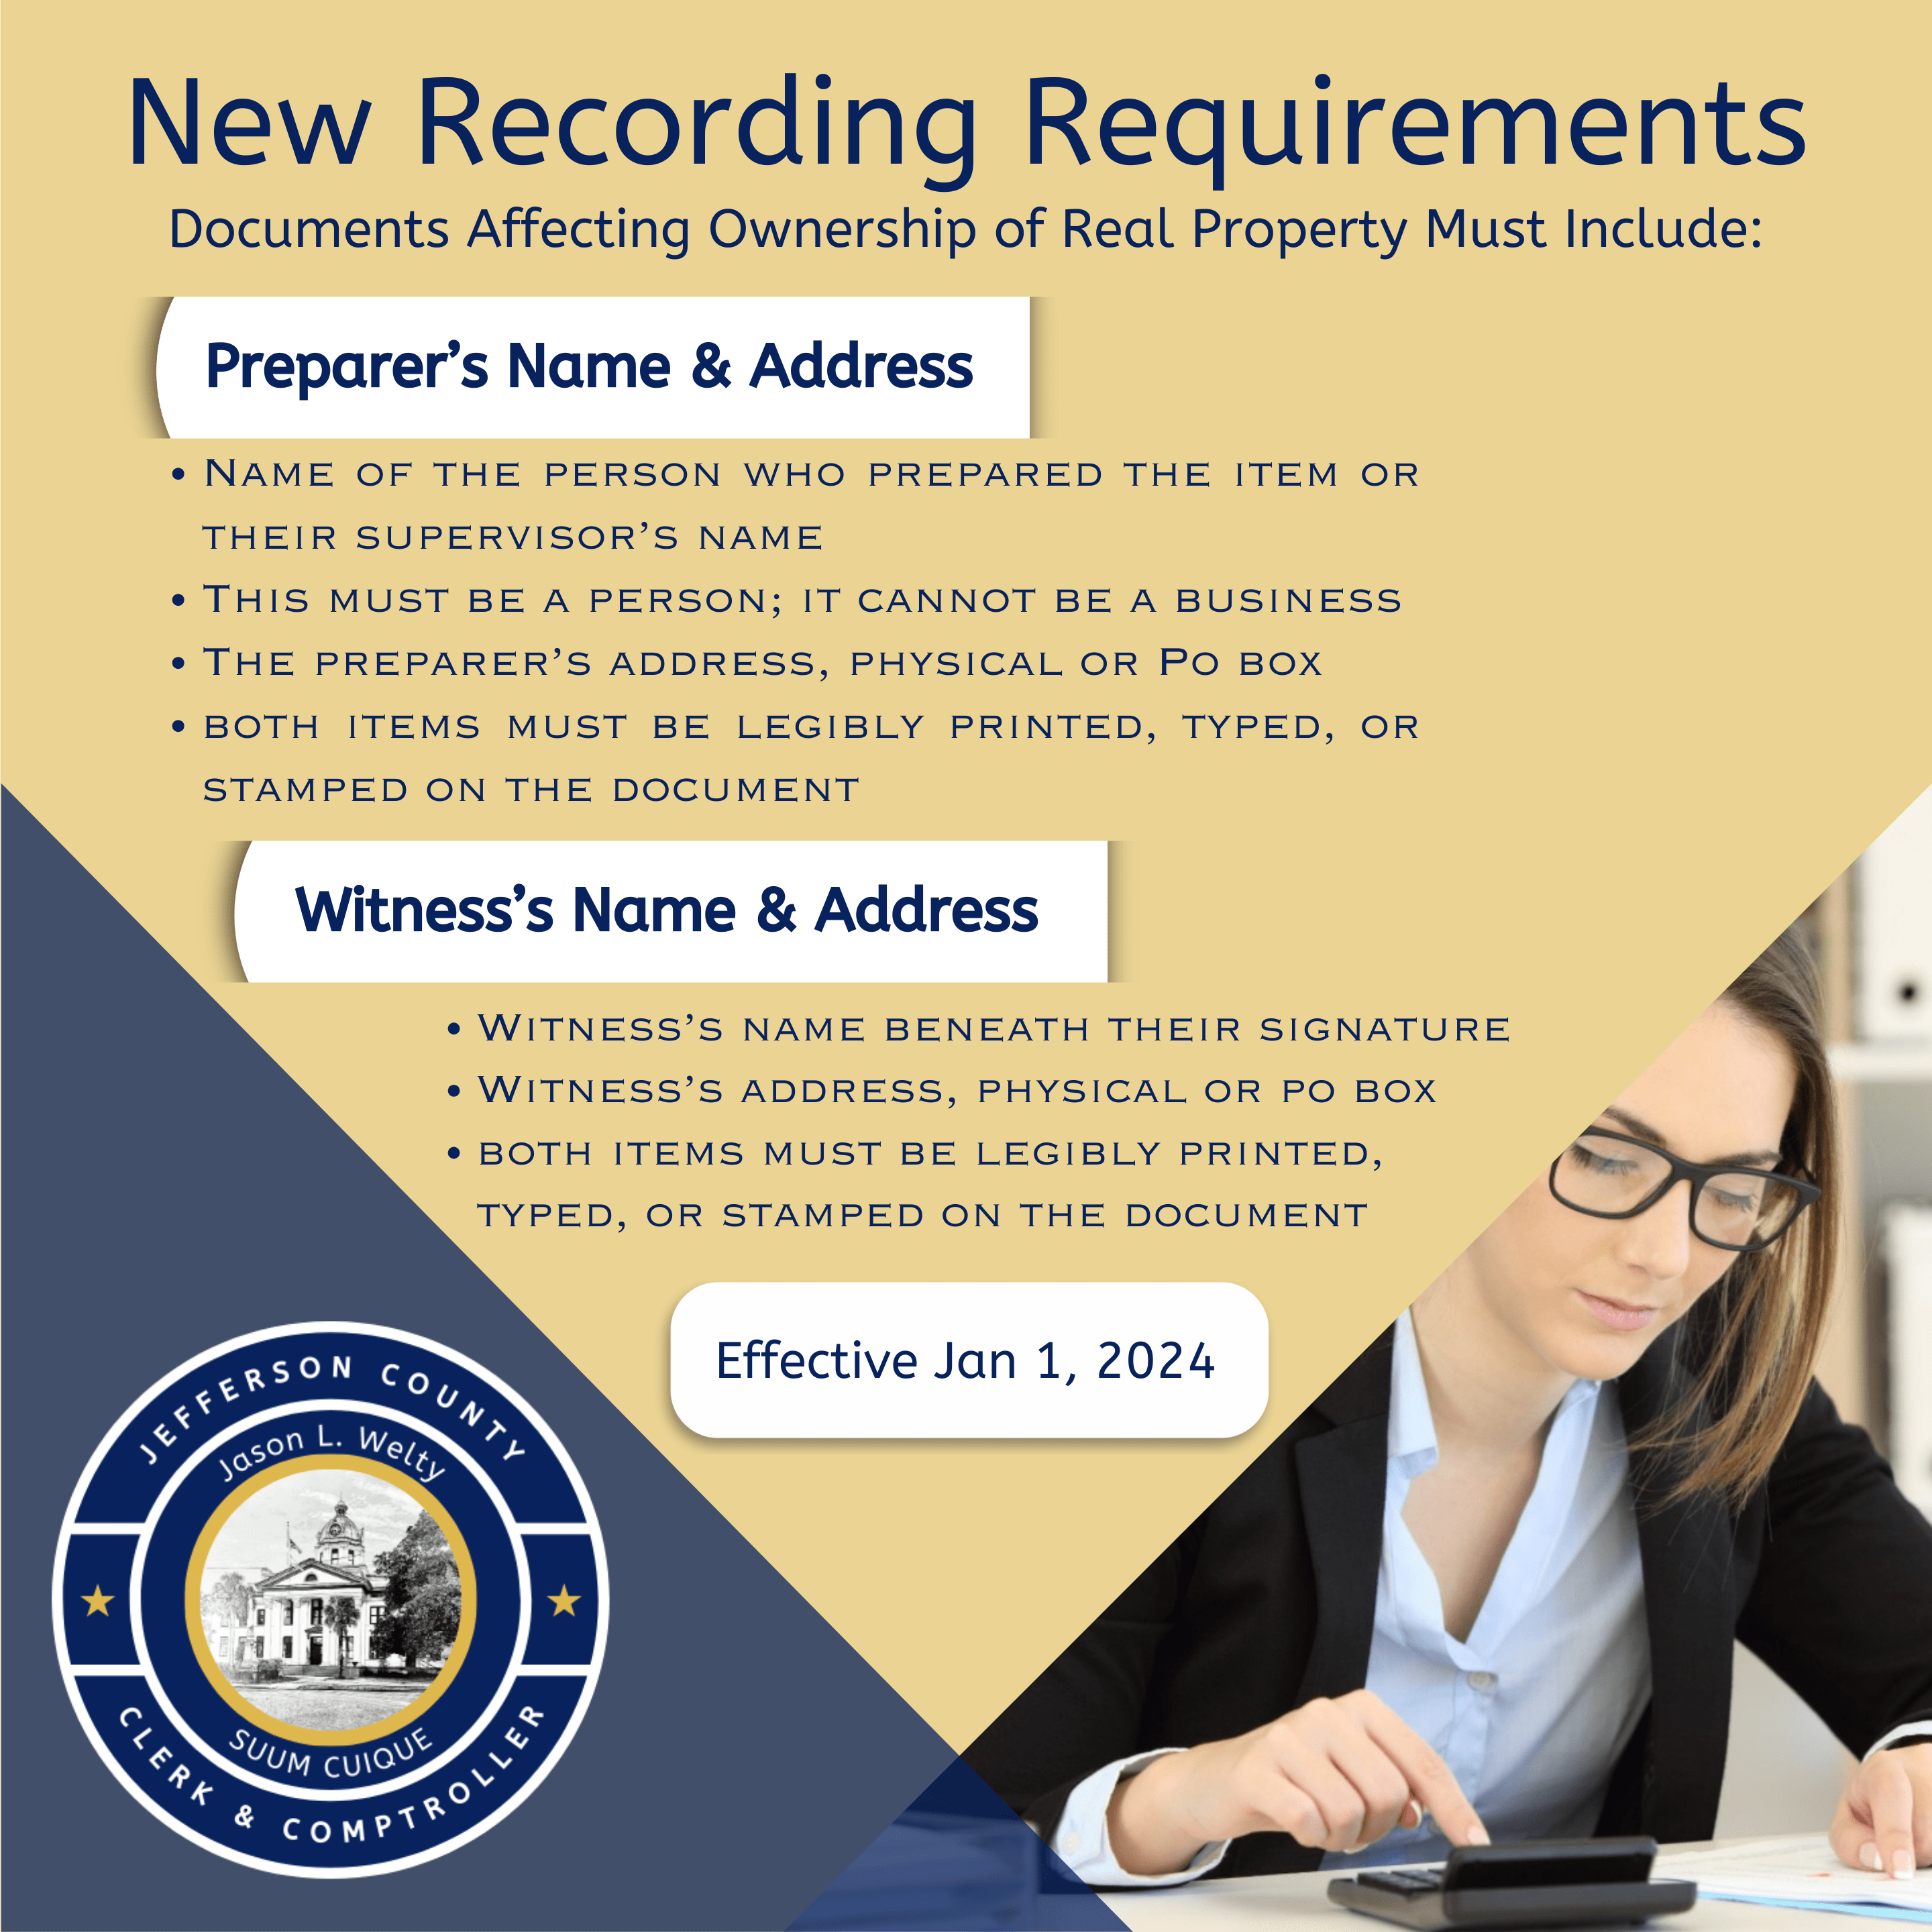 New Recording Requirements (1)